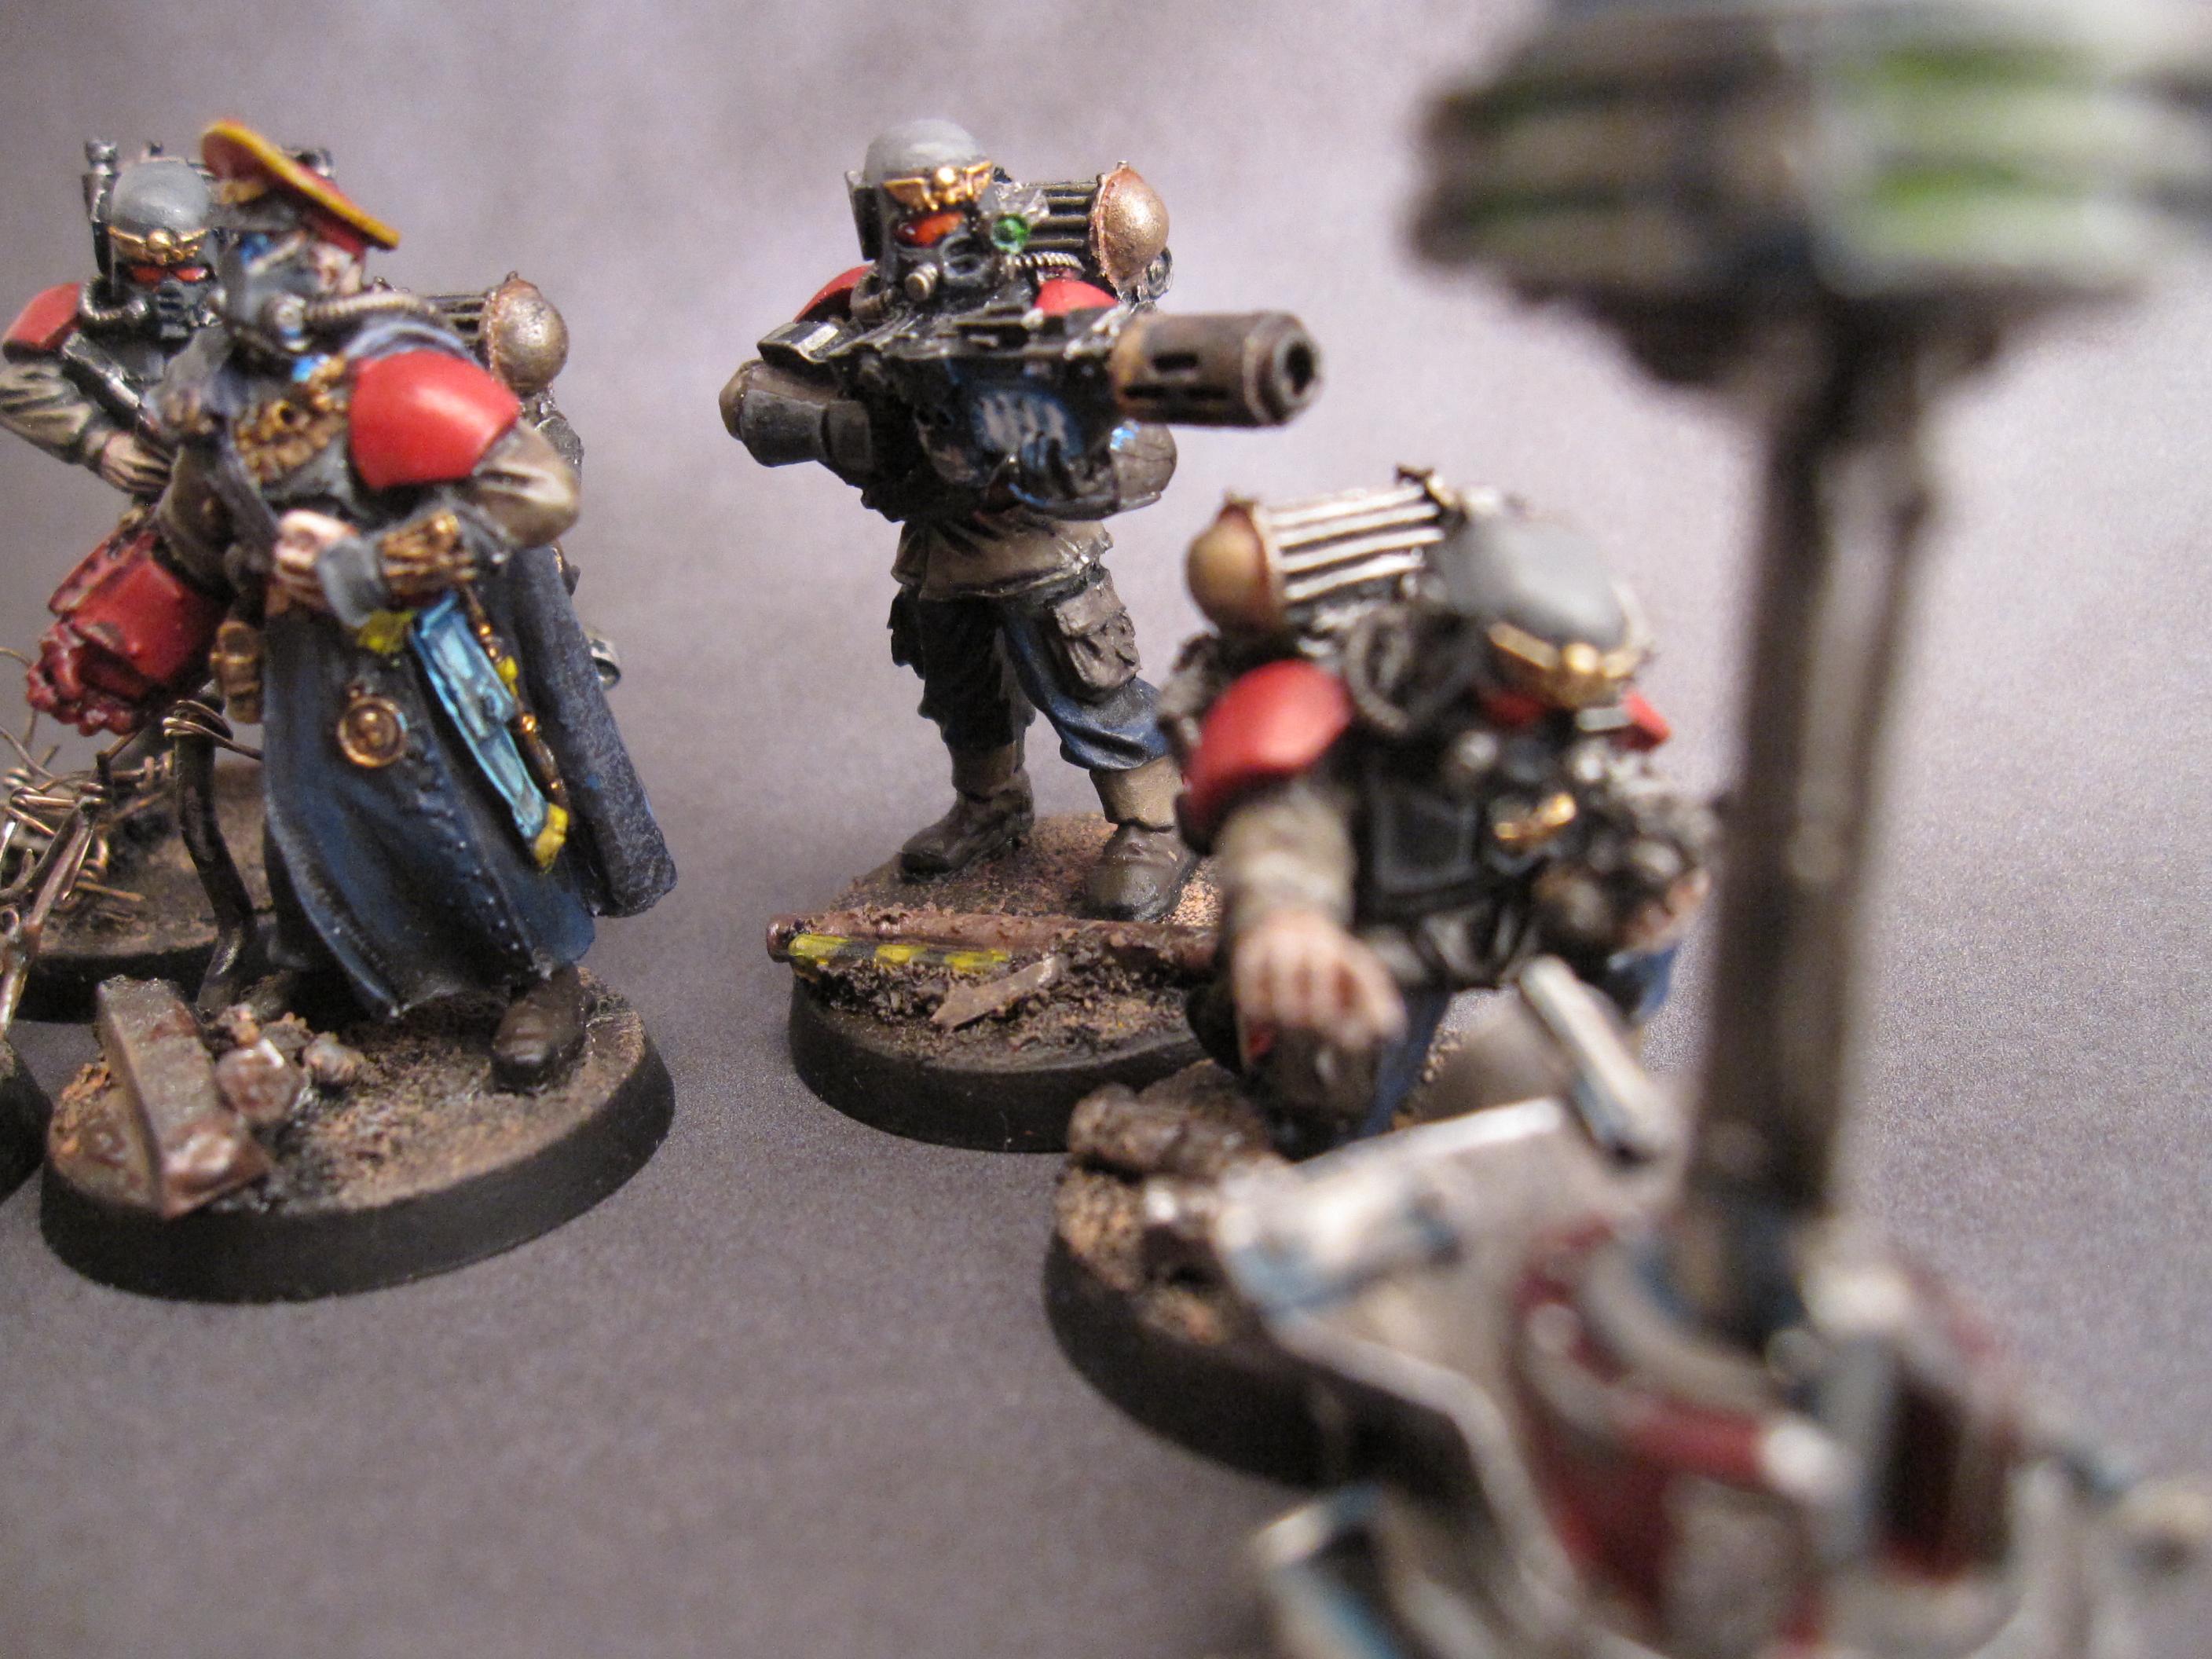 Cadians, Command, Commander, Environment, Forge World, Guard, Hostile, Imperial, Imperial Guard, Squad, Warhammer 40,000